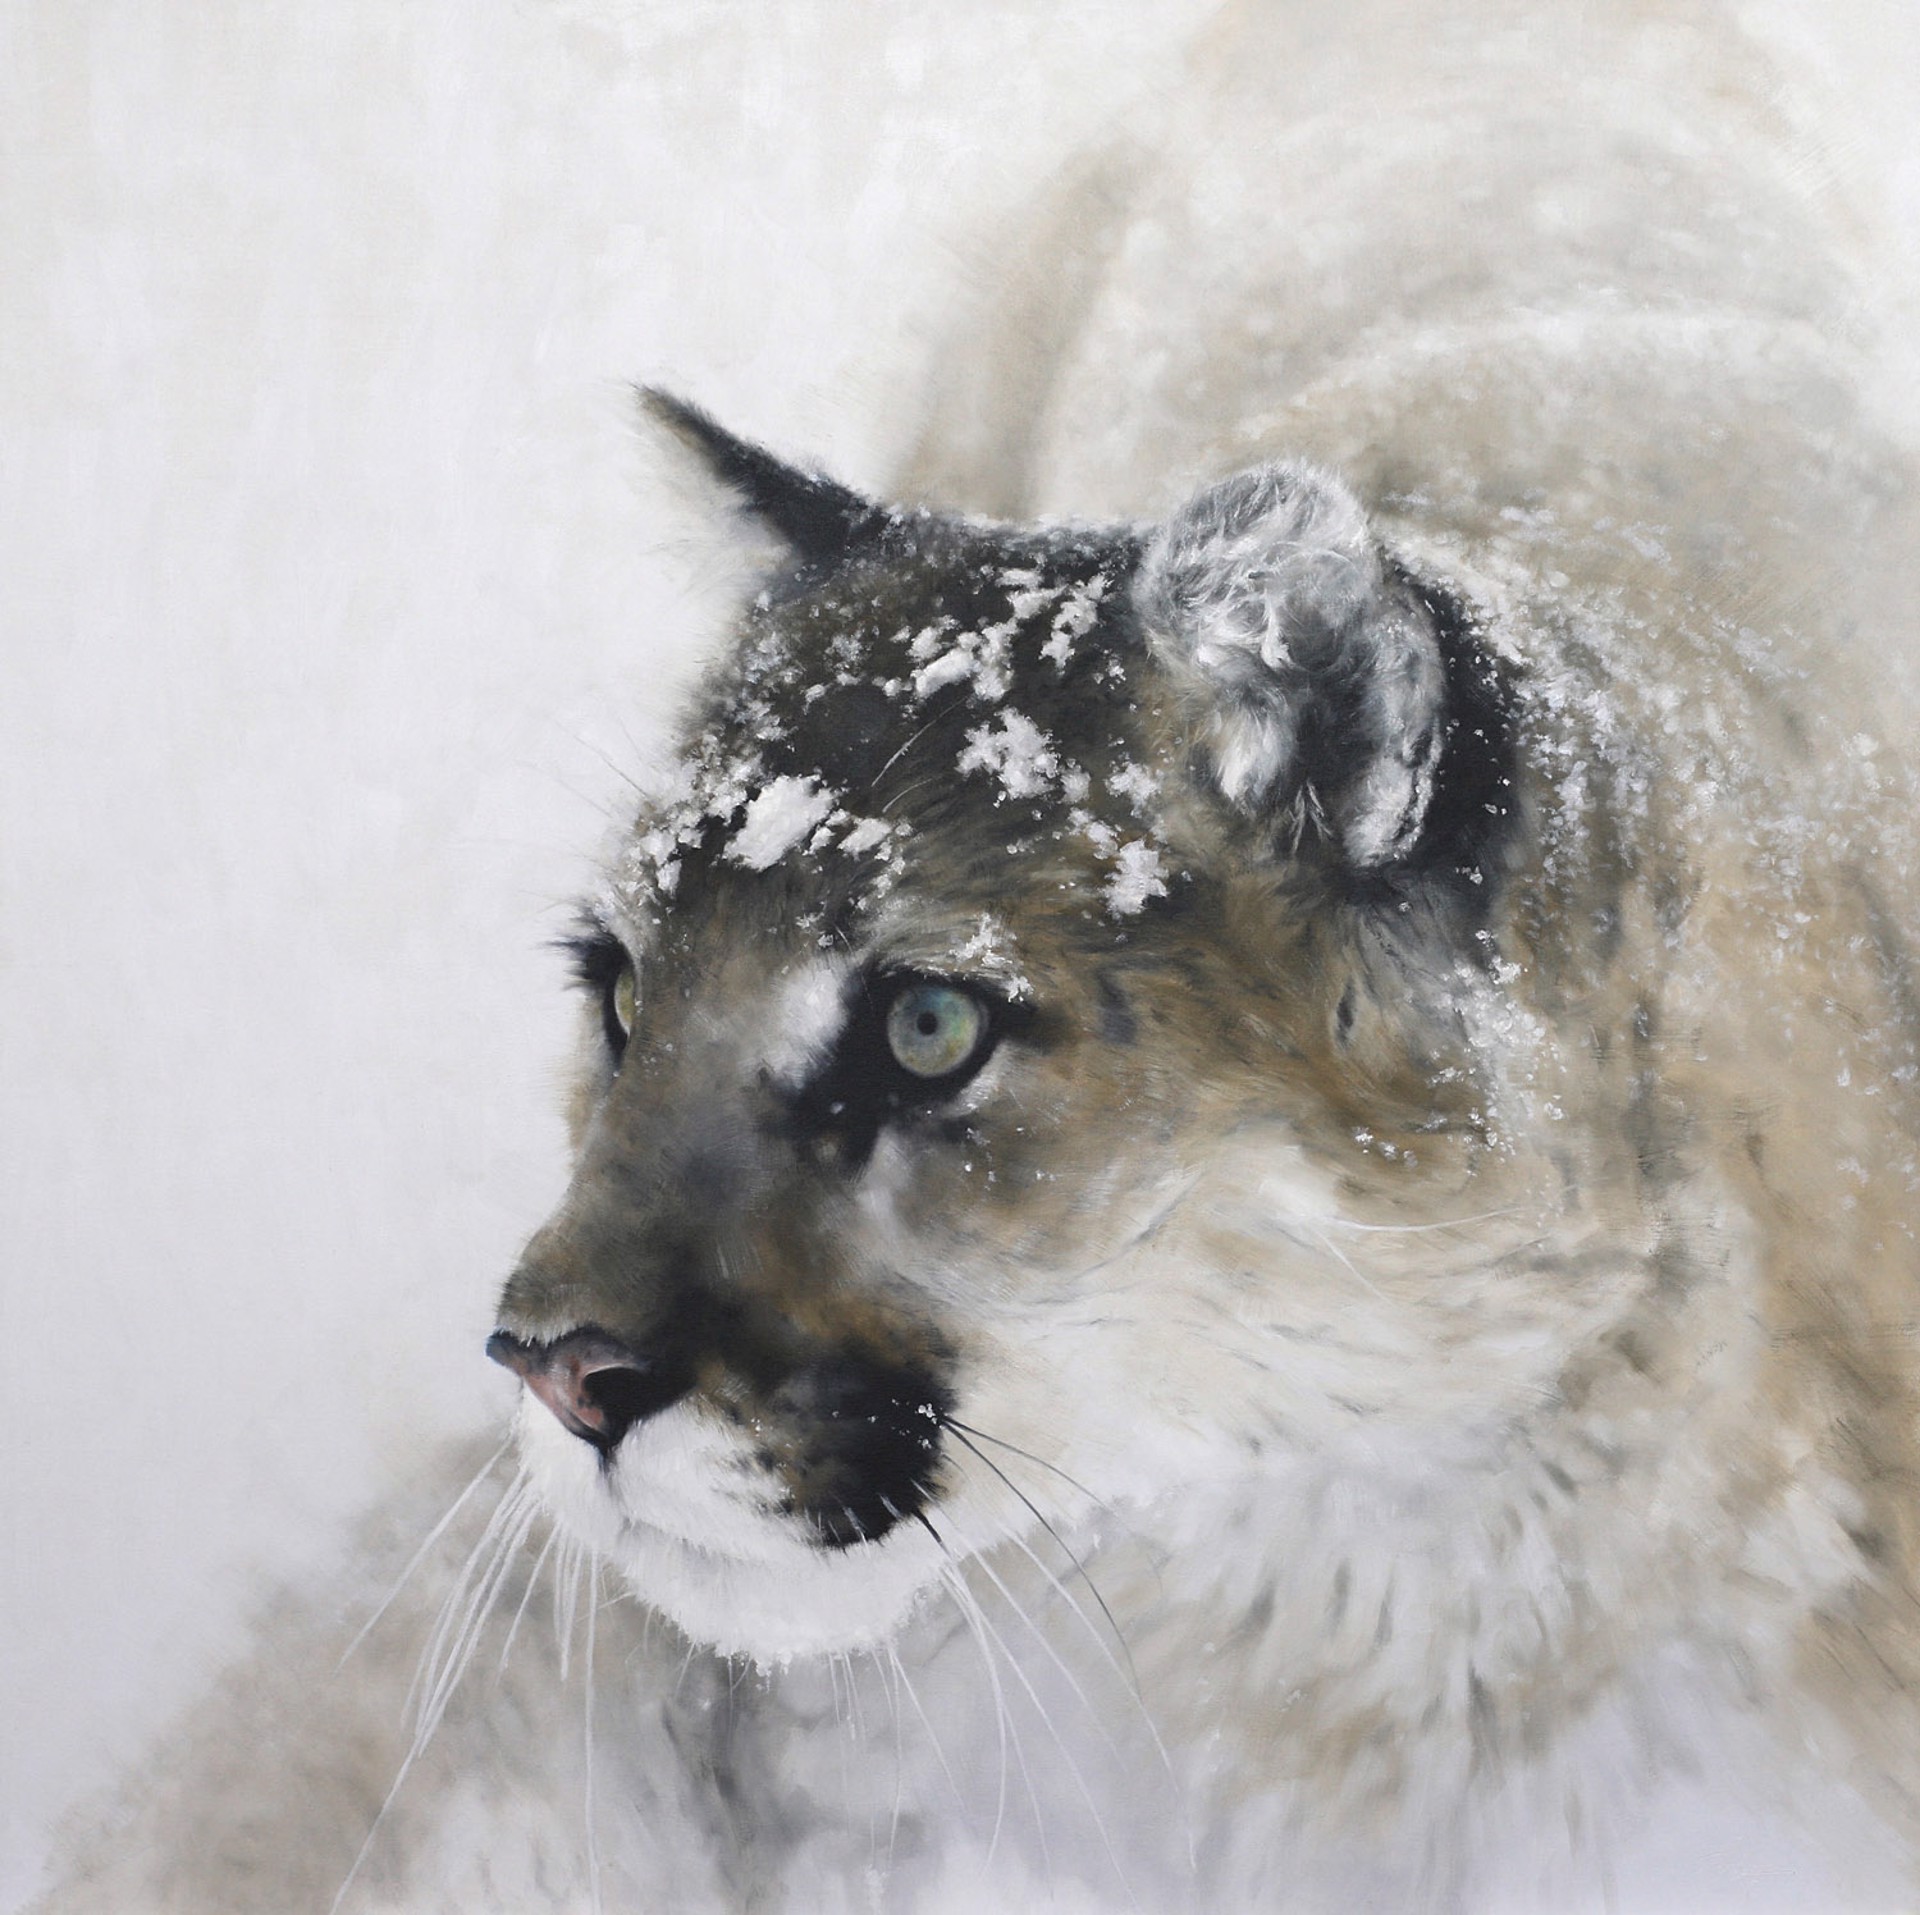 A Contemporary Black And White Painting Of A Mountain Lion Portrait In The Snow By Doyle Hostetler At Gallery Wild